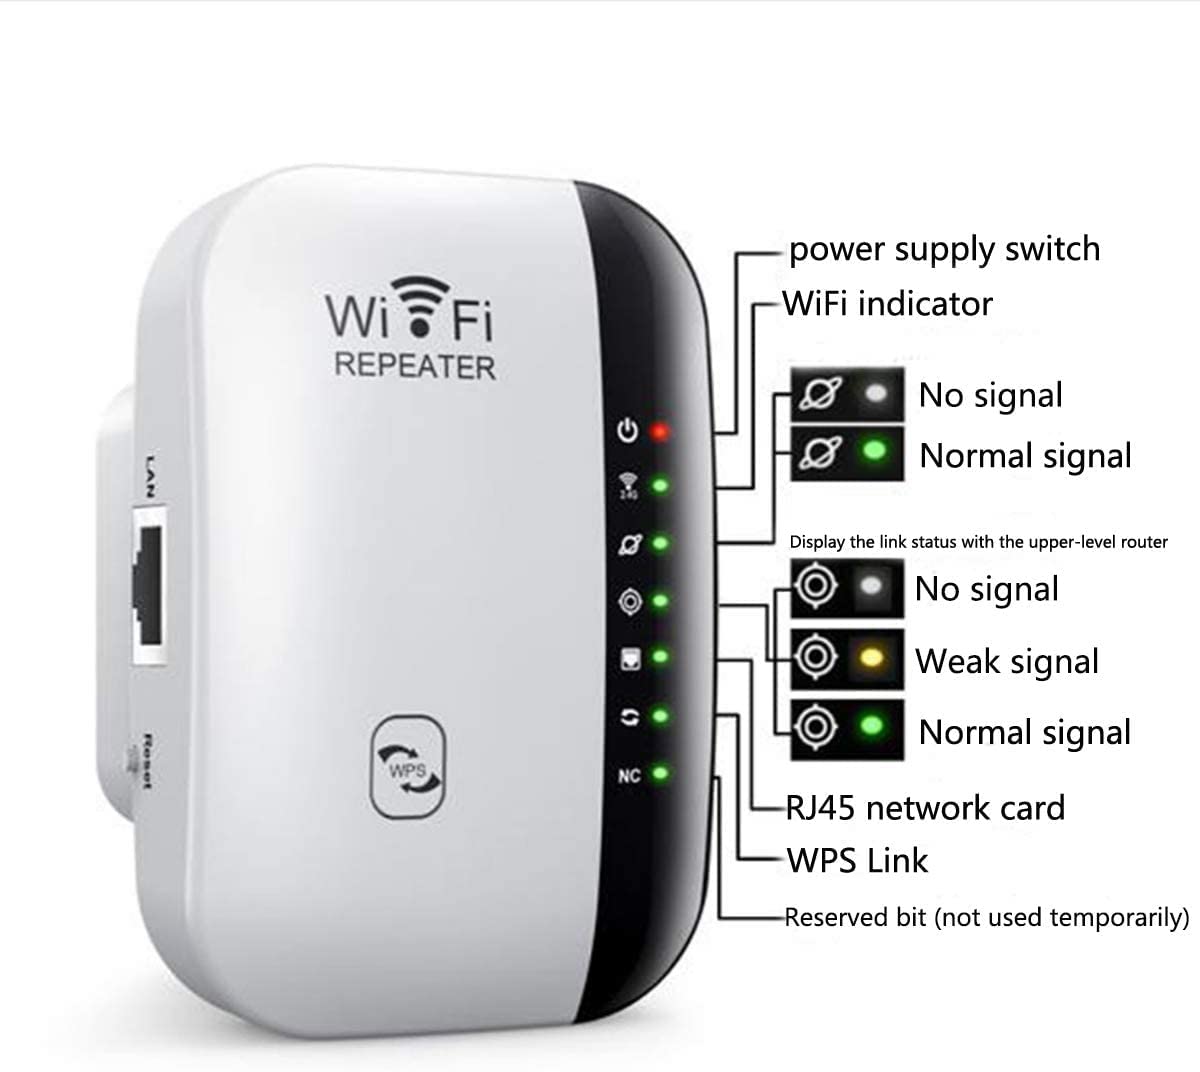 A network router or a signal strength indicator.